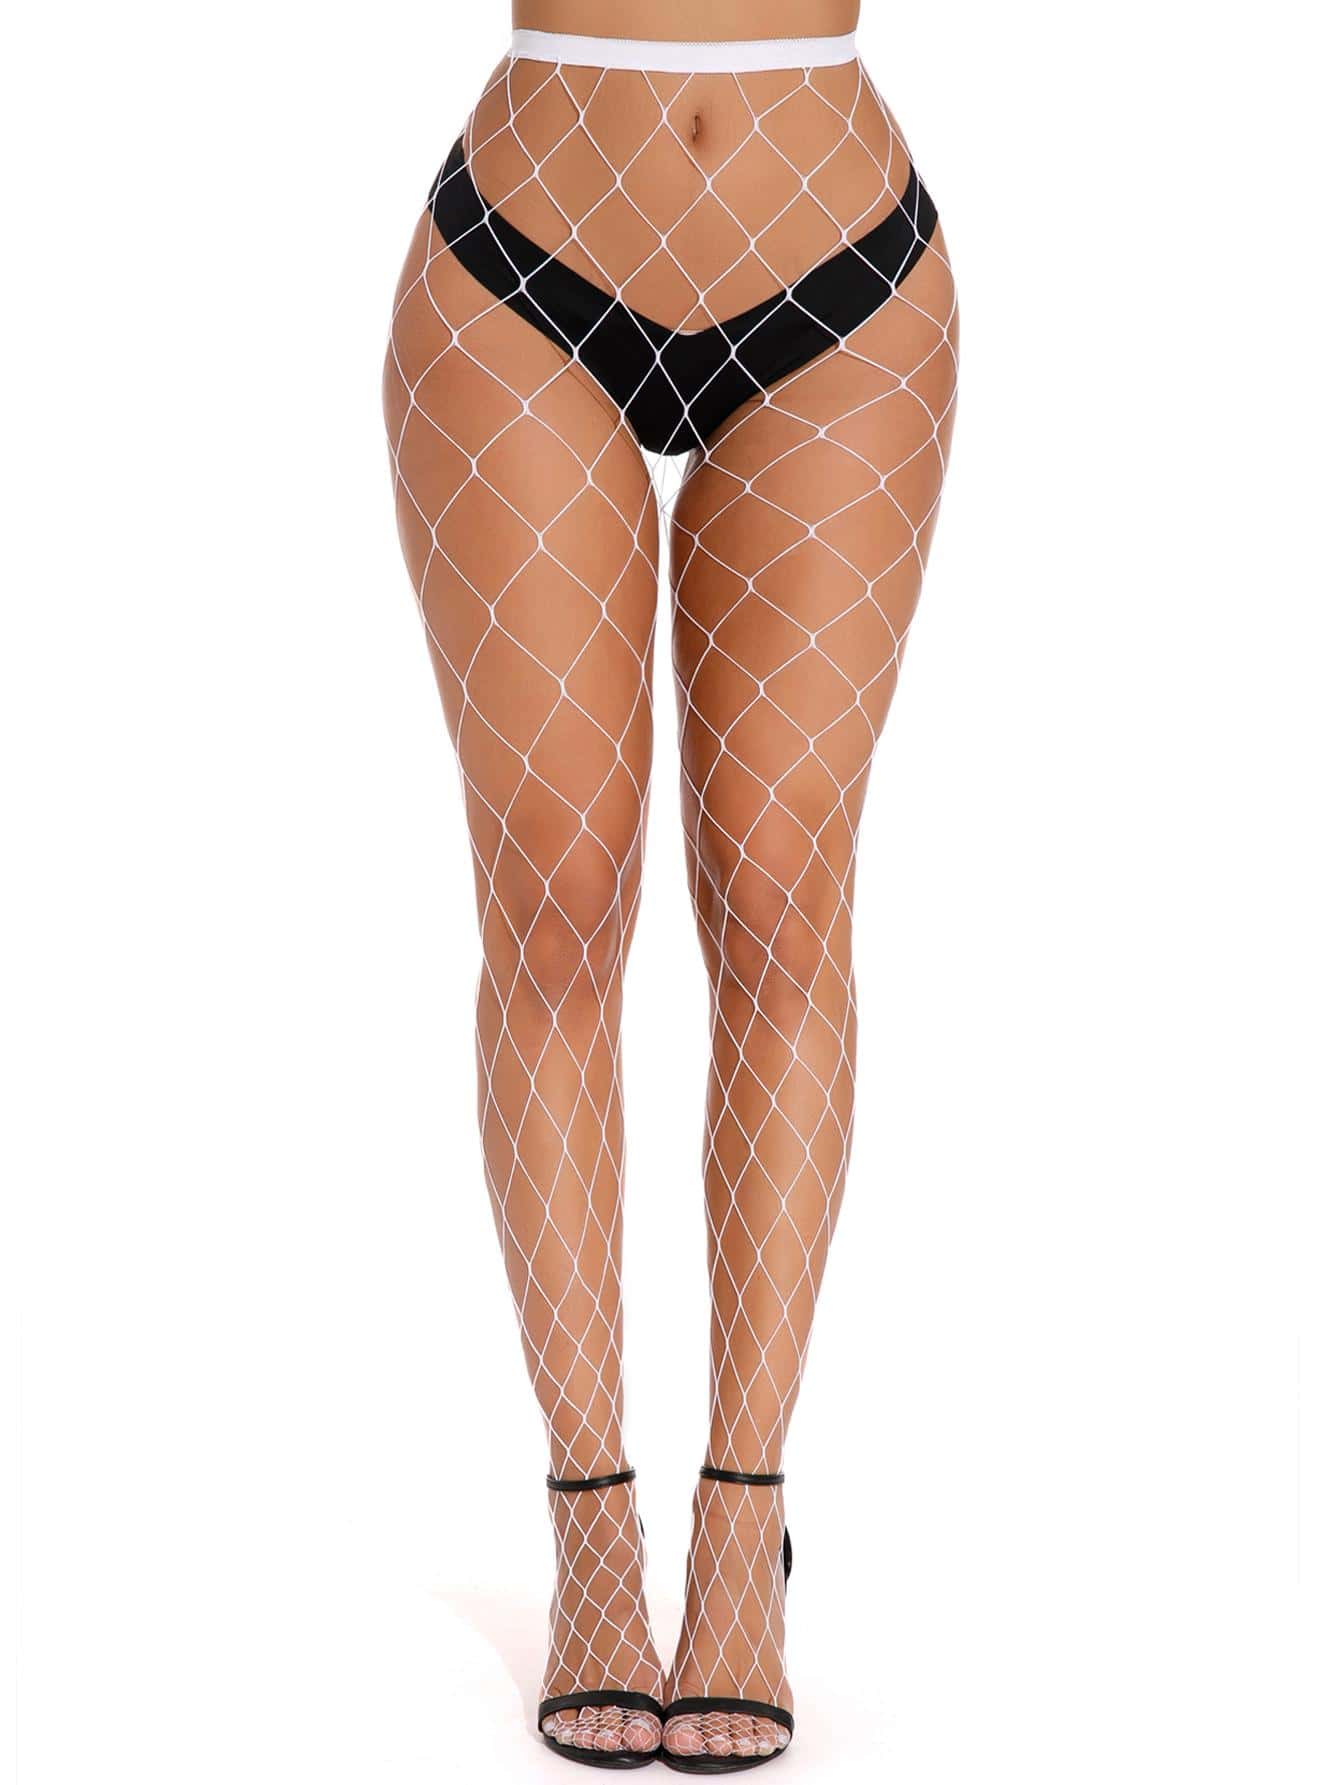 1pair Women Solid Casual Fishnet Tights For Daily Life